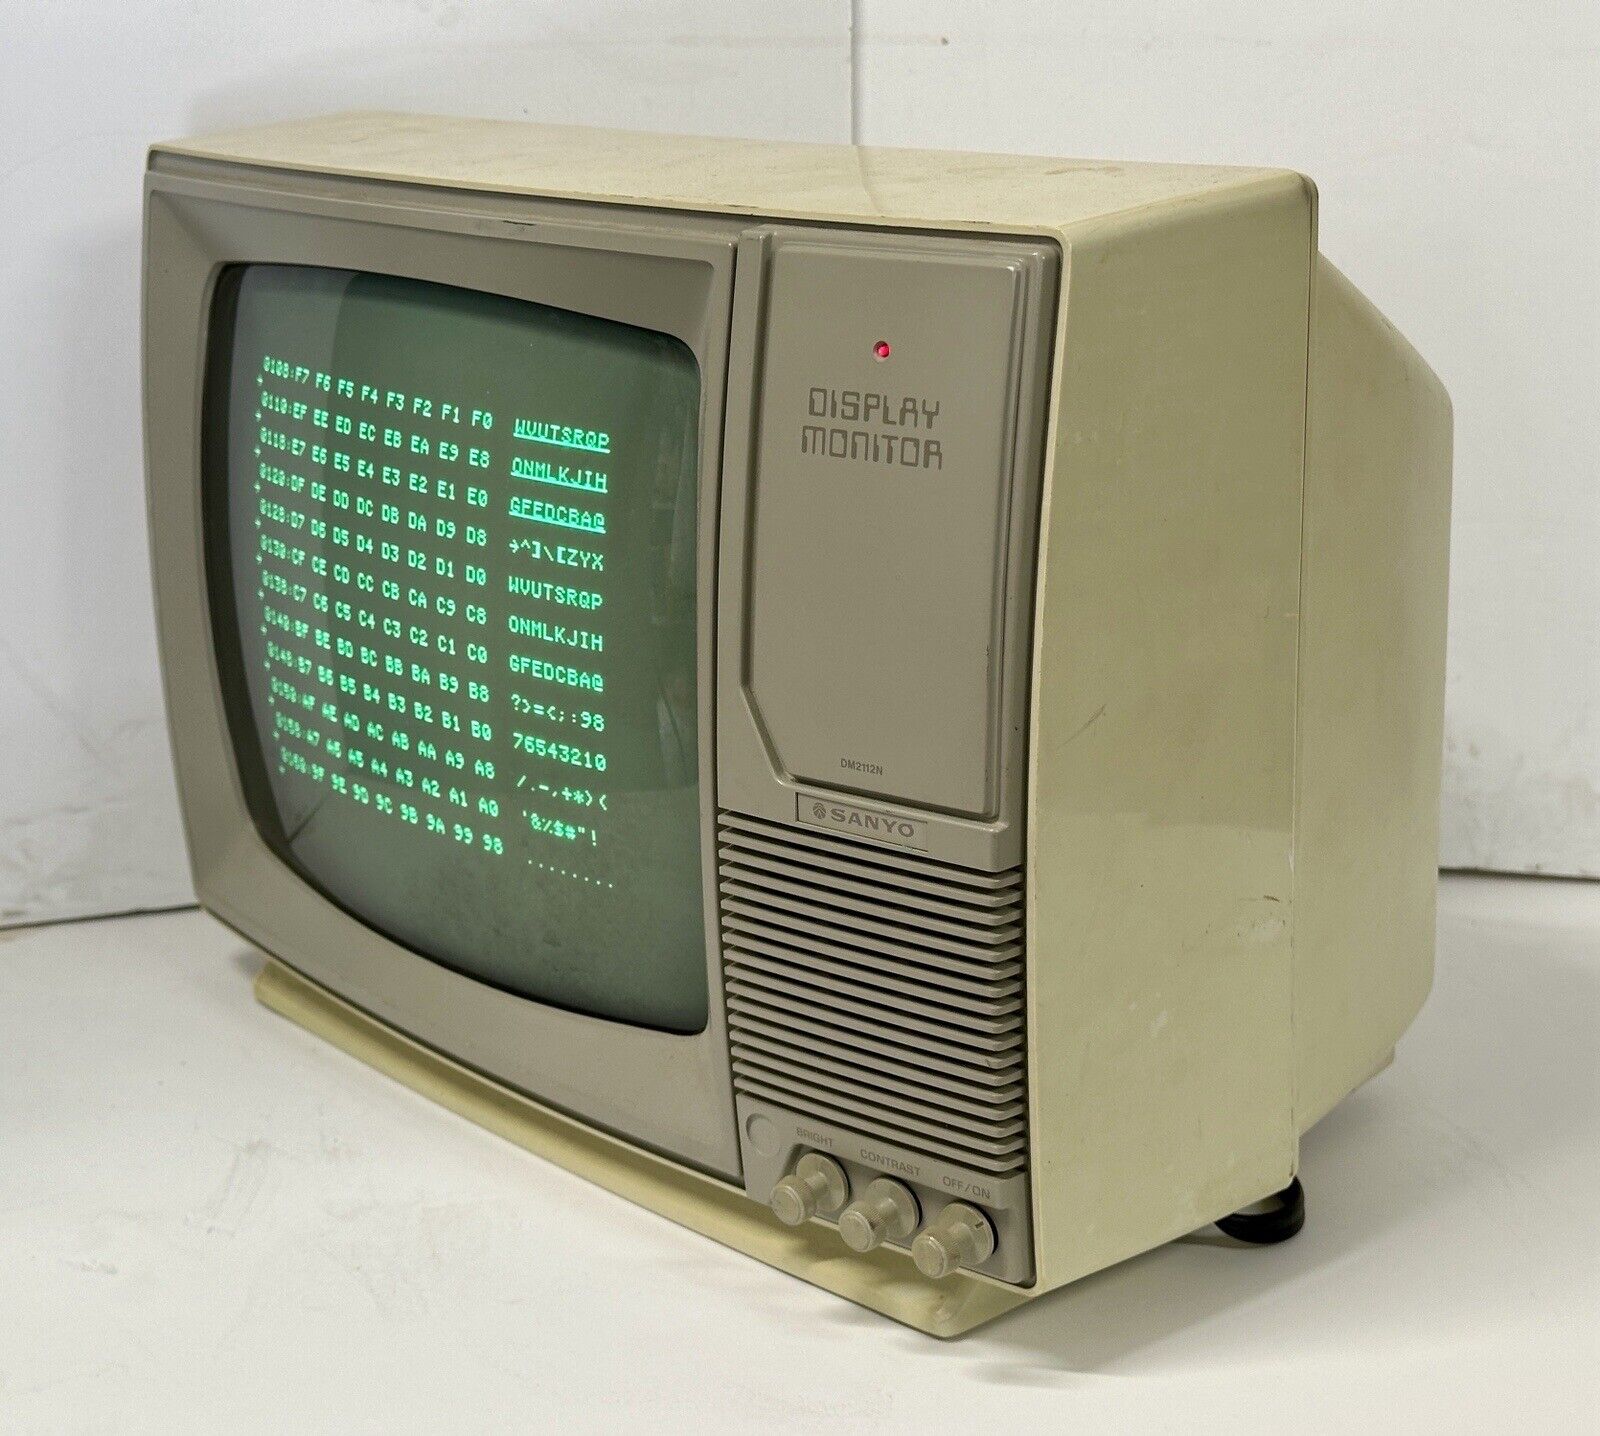 Vintage composite computer Sanyo video monitor from 1983.